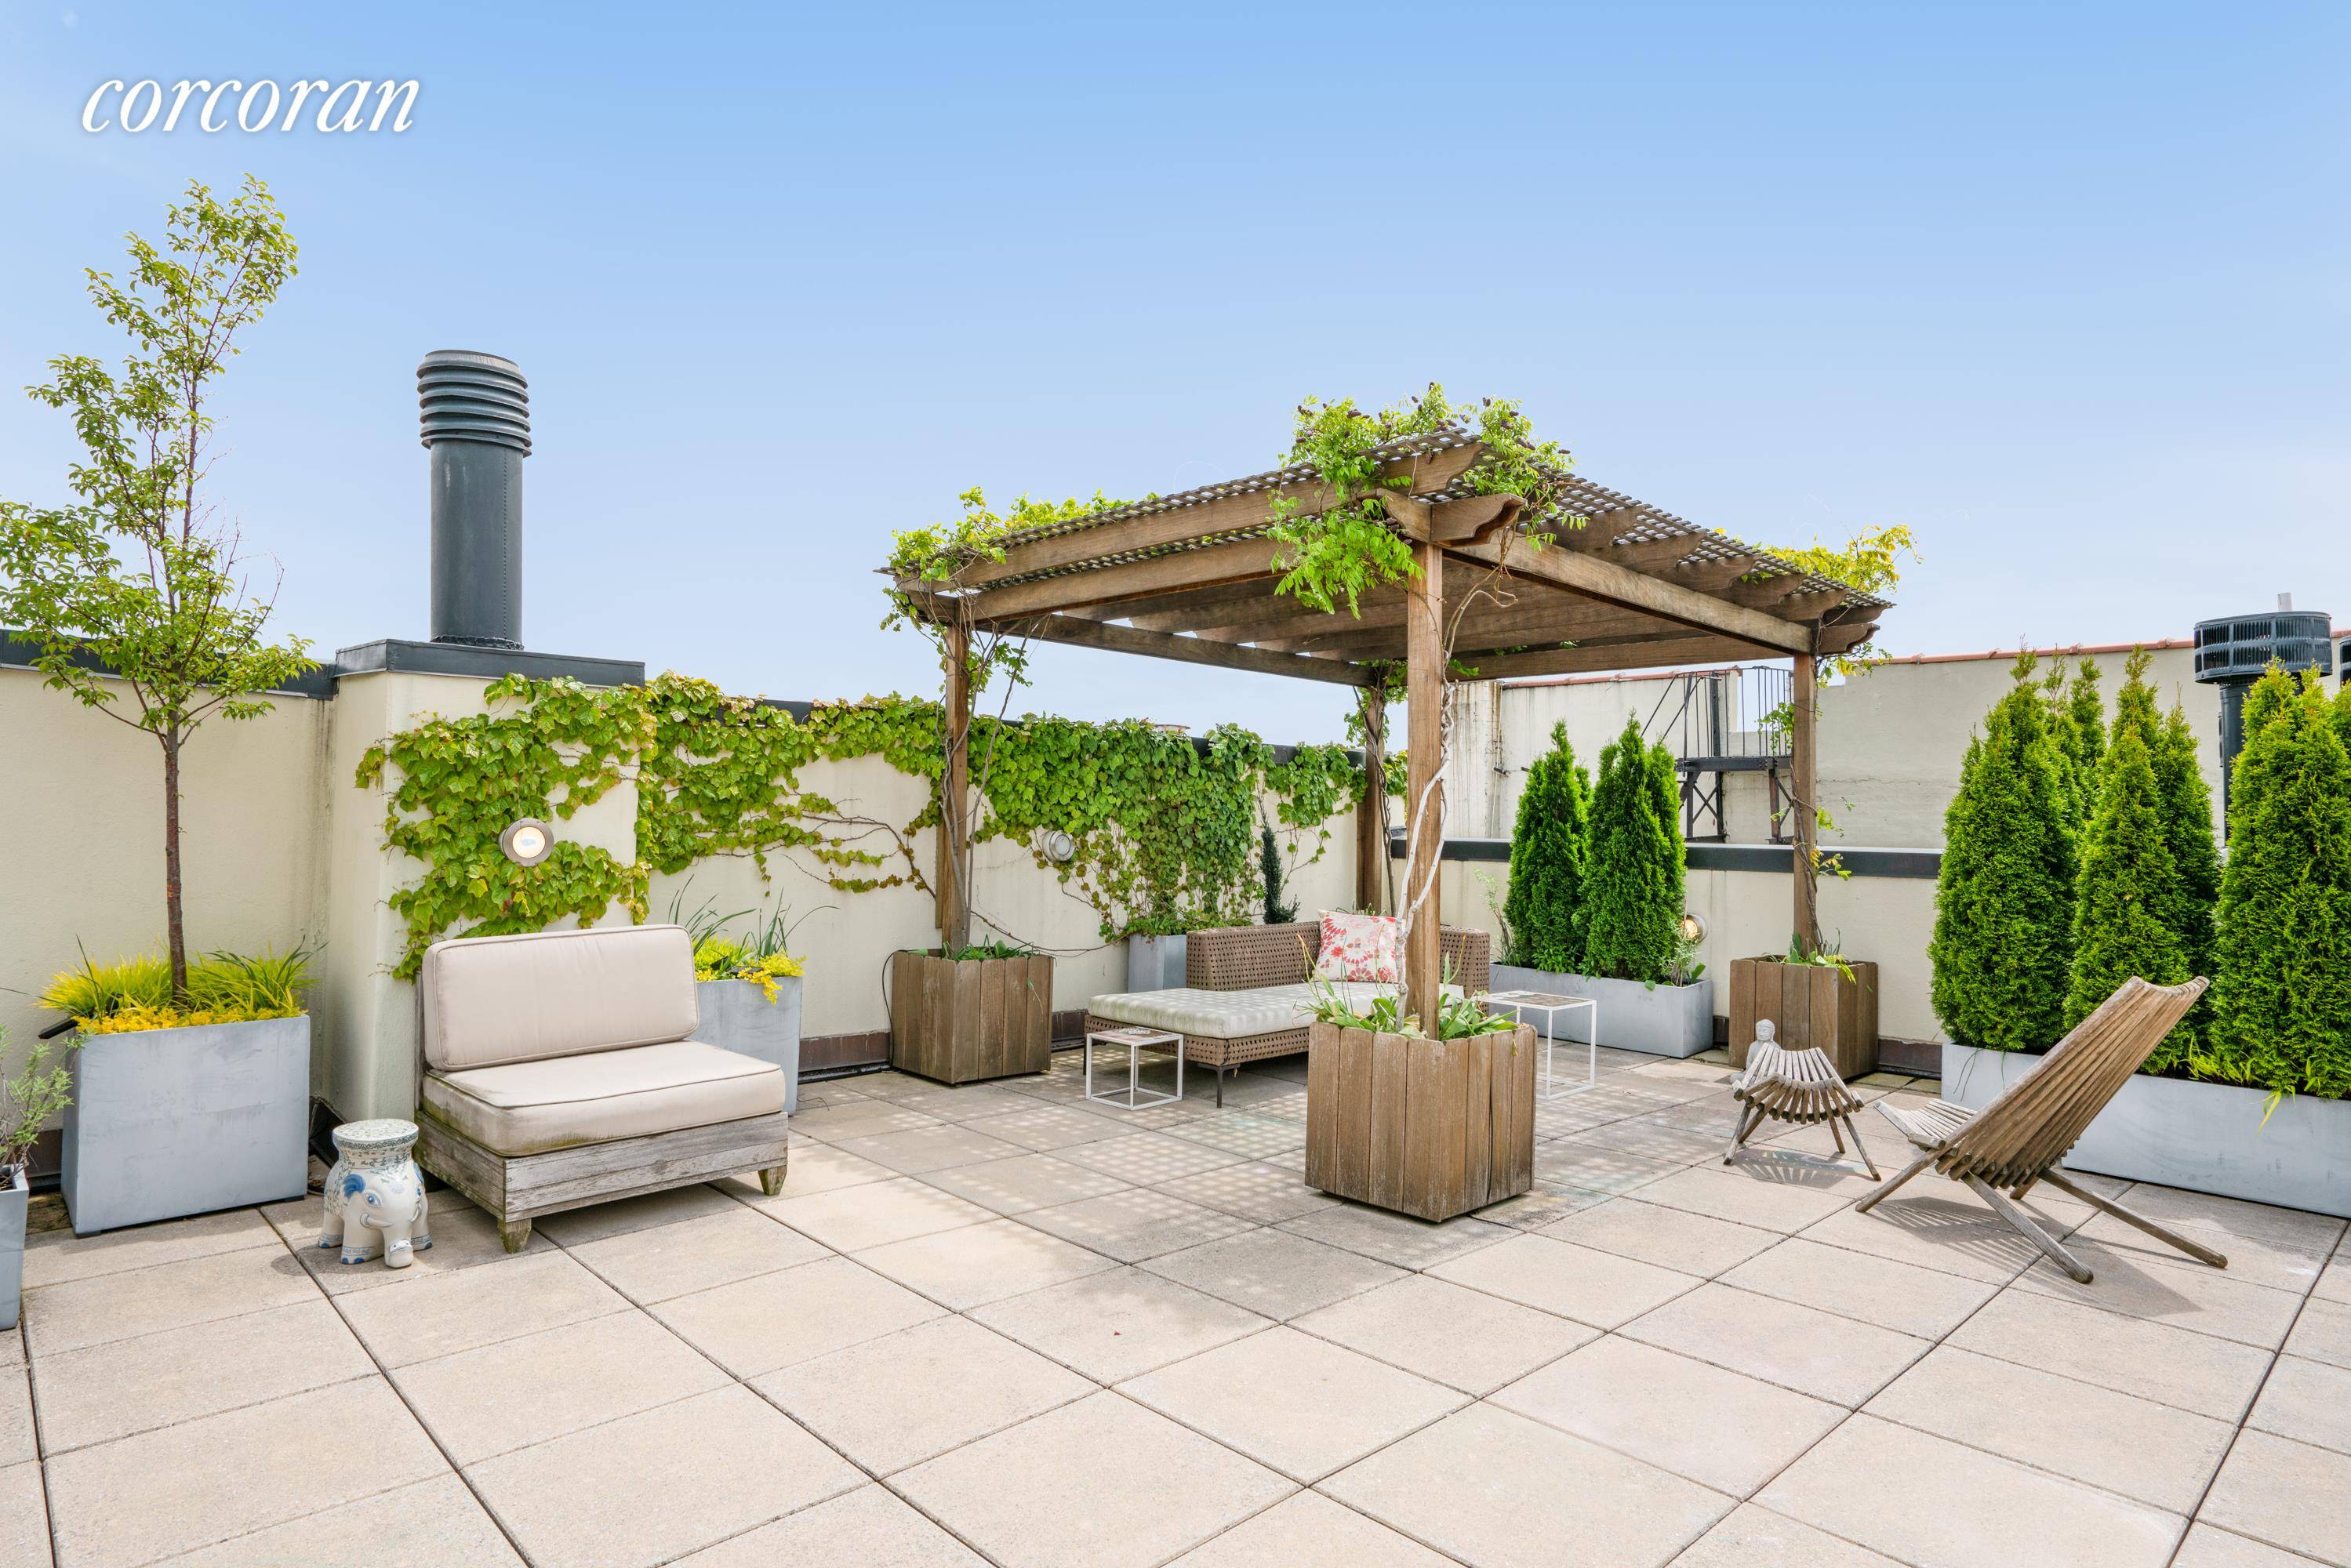 Extraordinarily rare Penthouse atop the Carriage House Loft Condominiums featuring an enormous, professionally landscaped rooftop garden perched above !